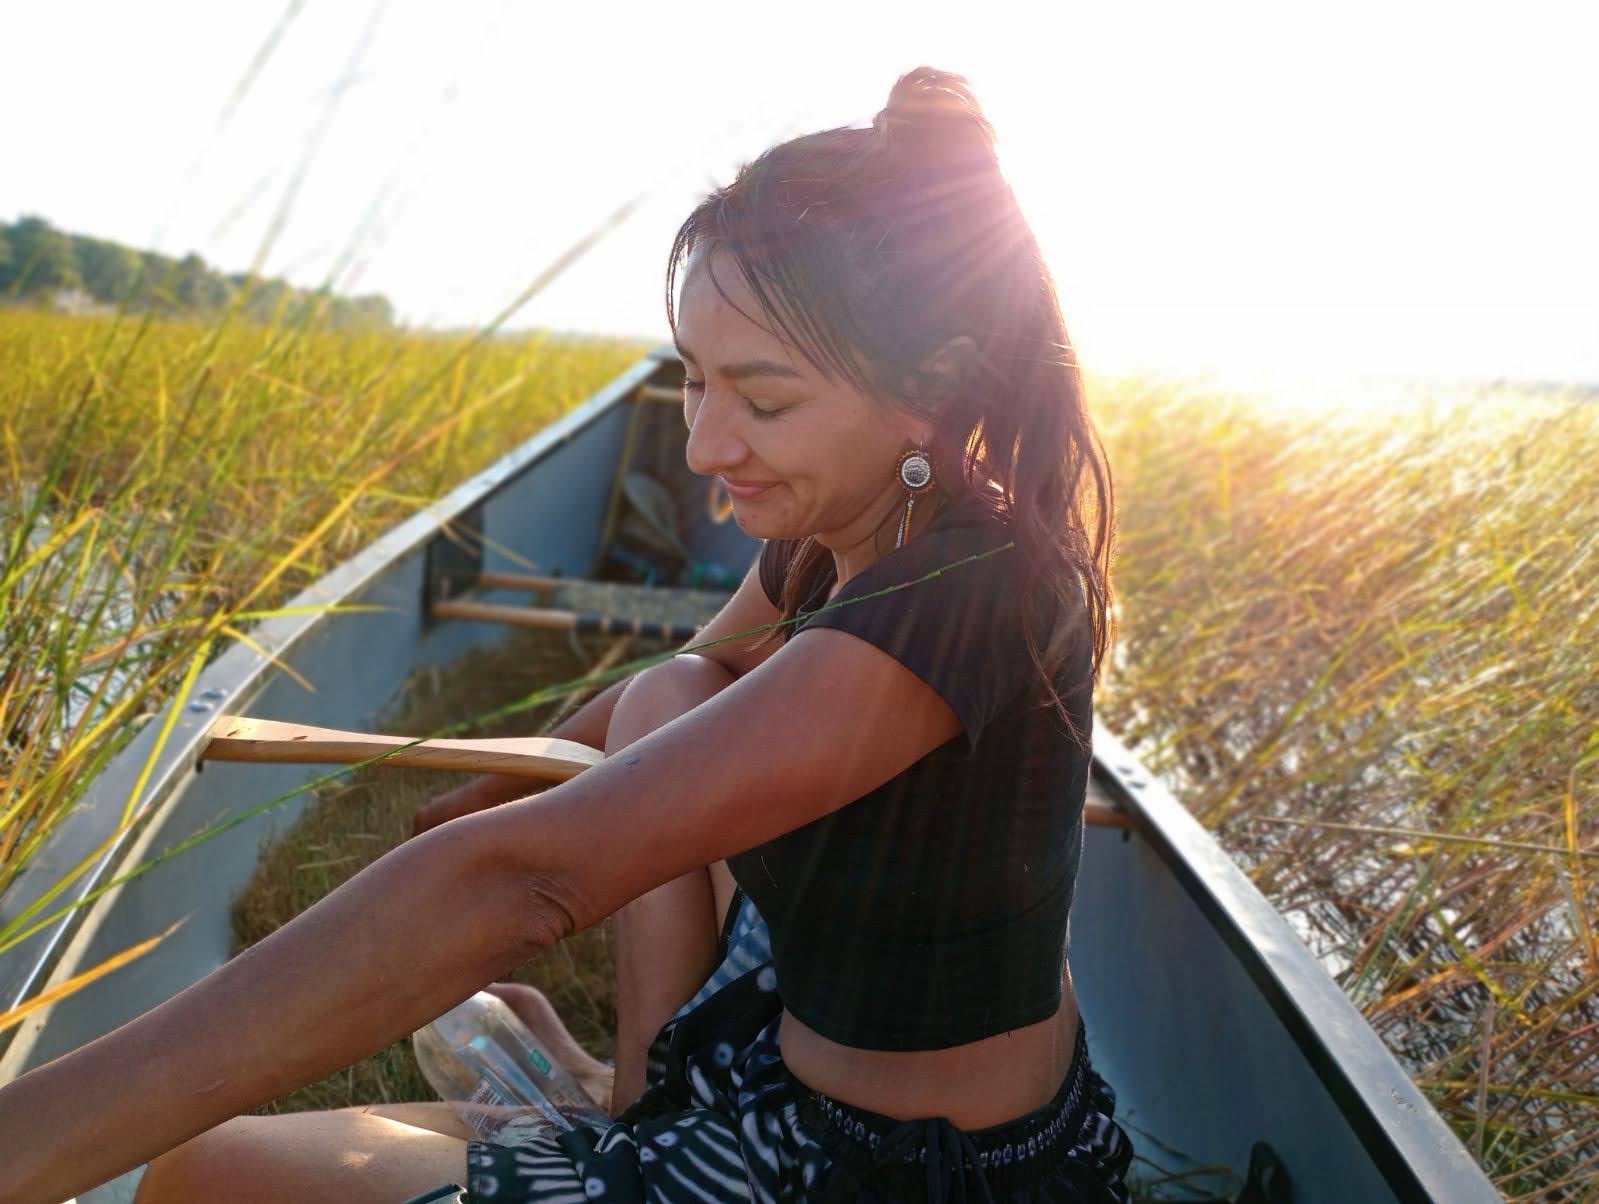 photo of an indigenous woman in a dark skirt and top in a canoe on a body of water full of rice plants